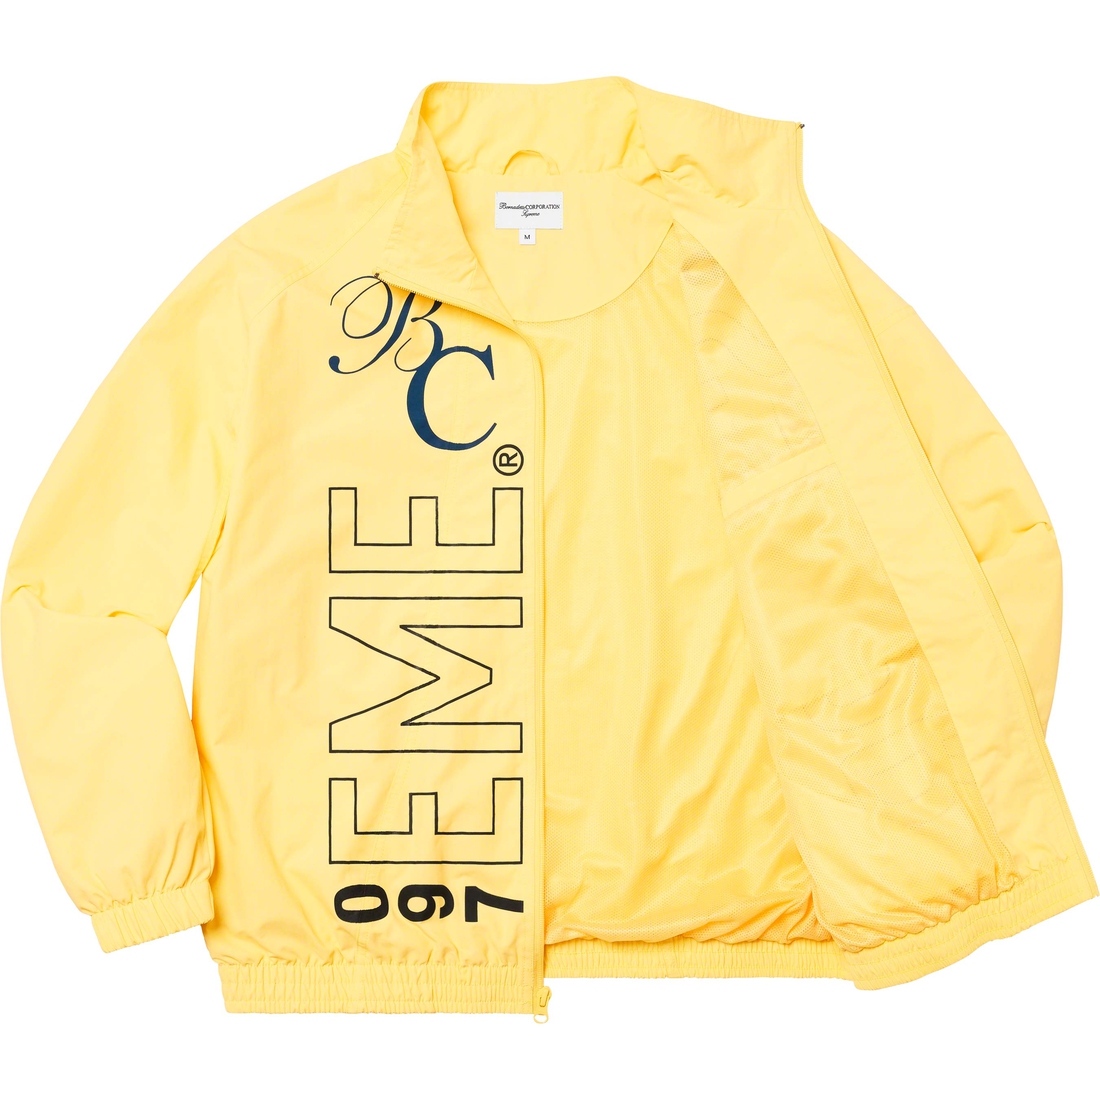 Details on Supreme Bernadette Corporation Track Jacket Pale Yellow from spring summer
                                                    2023 (Price is $188)